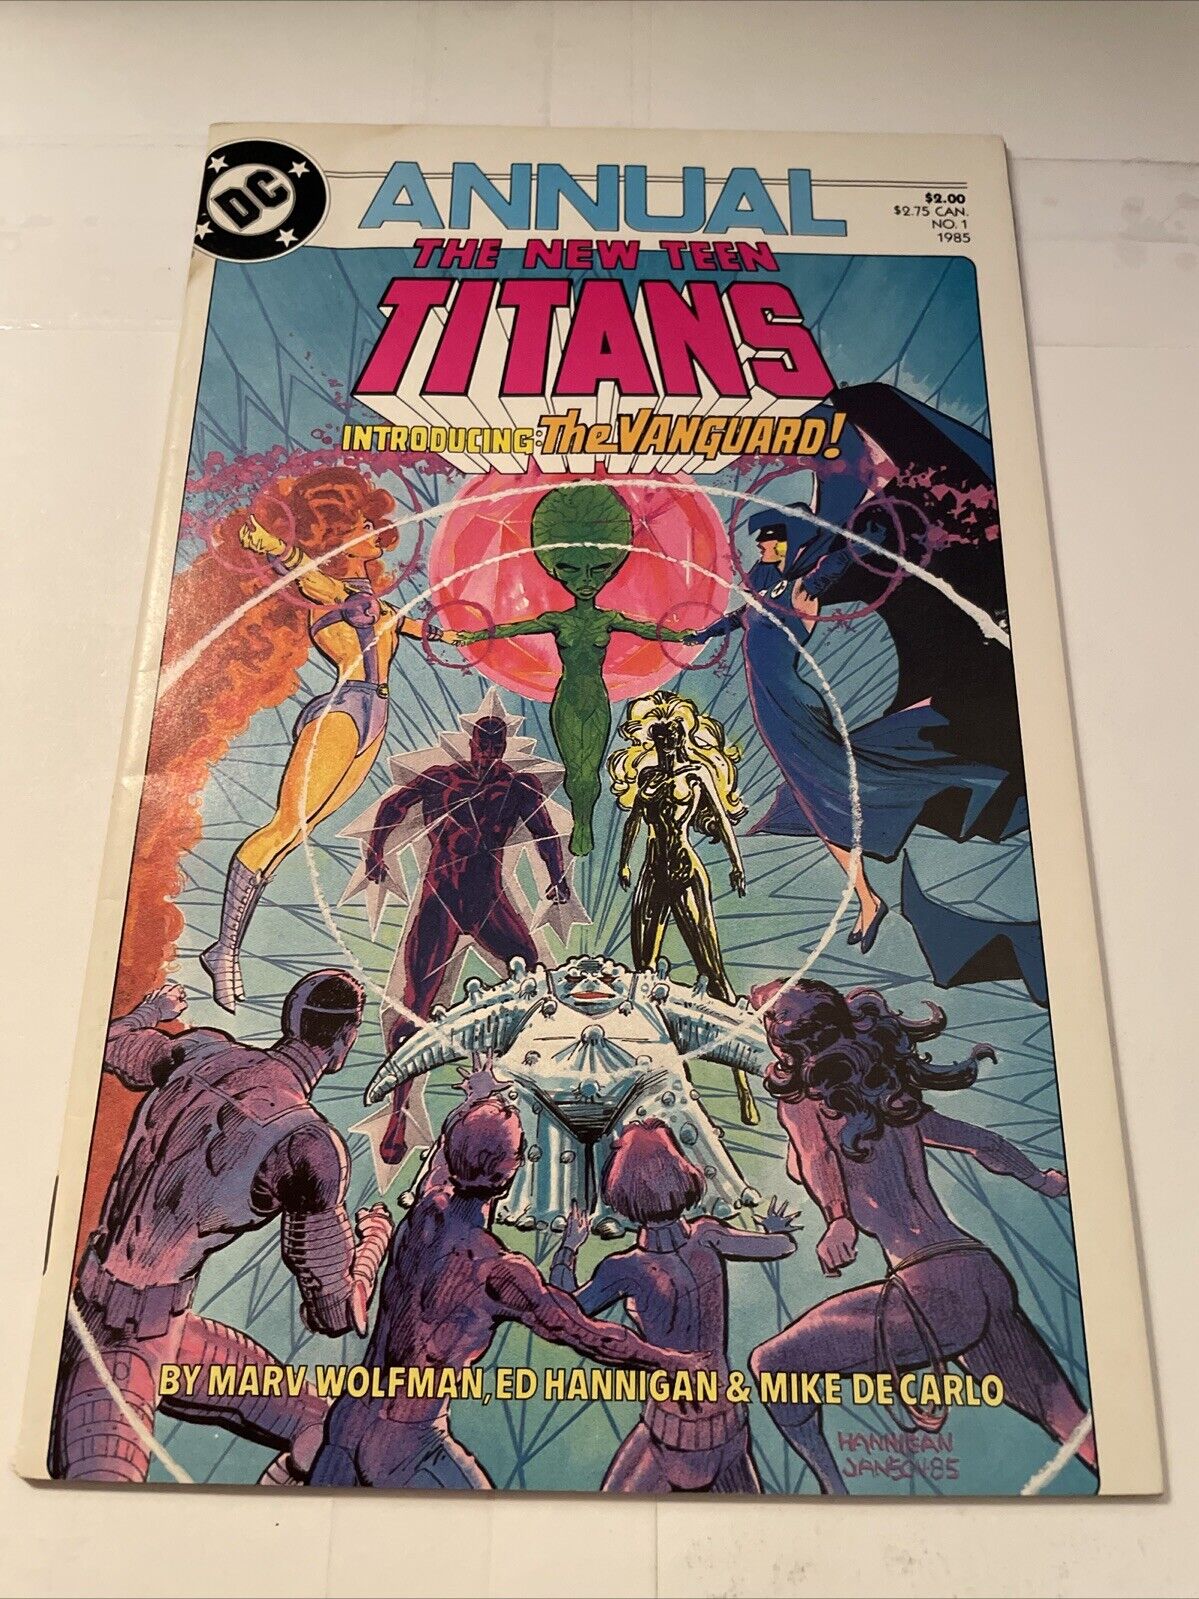 1984 #1 DC The New Teen Titans Introducing The Vanguard Annual Comic Book